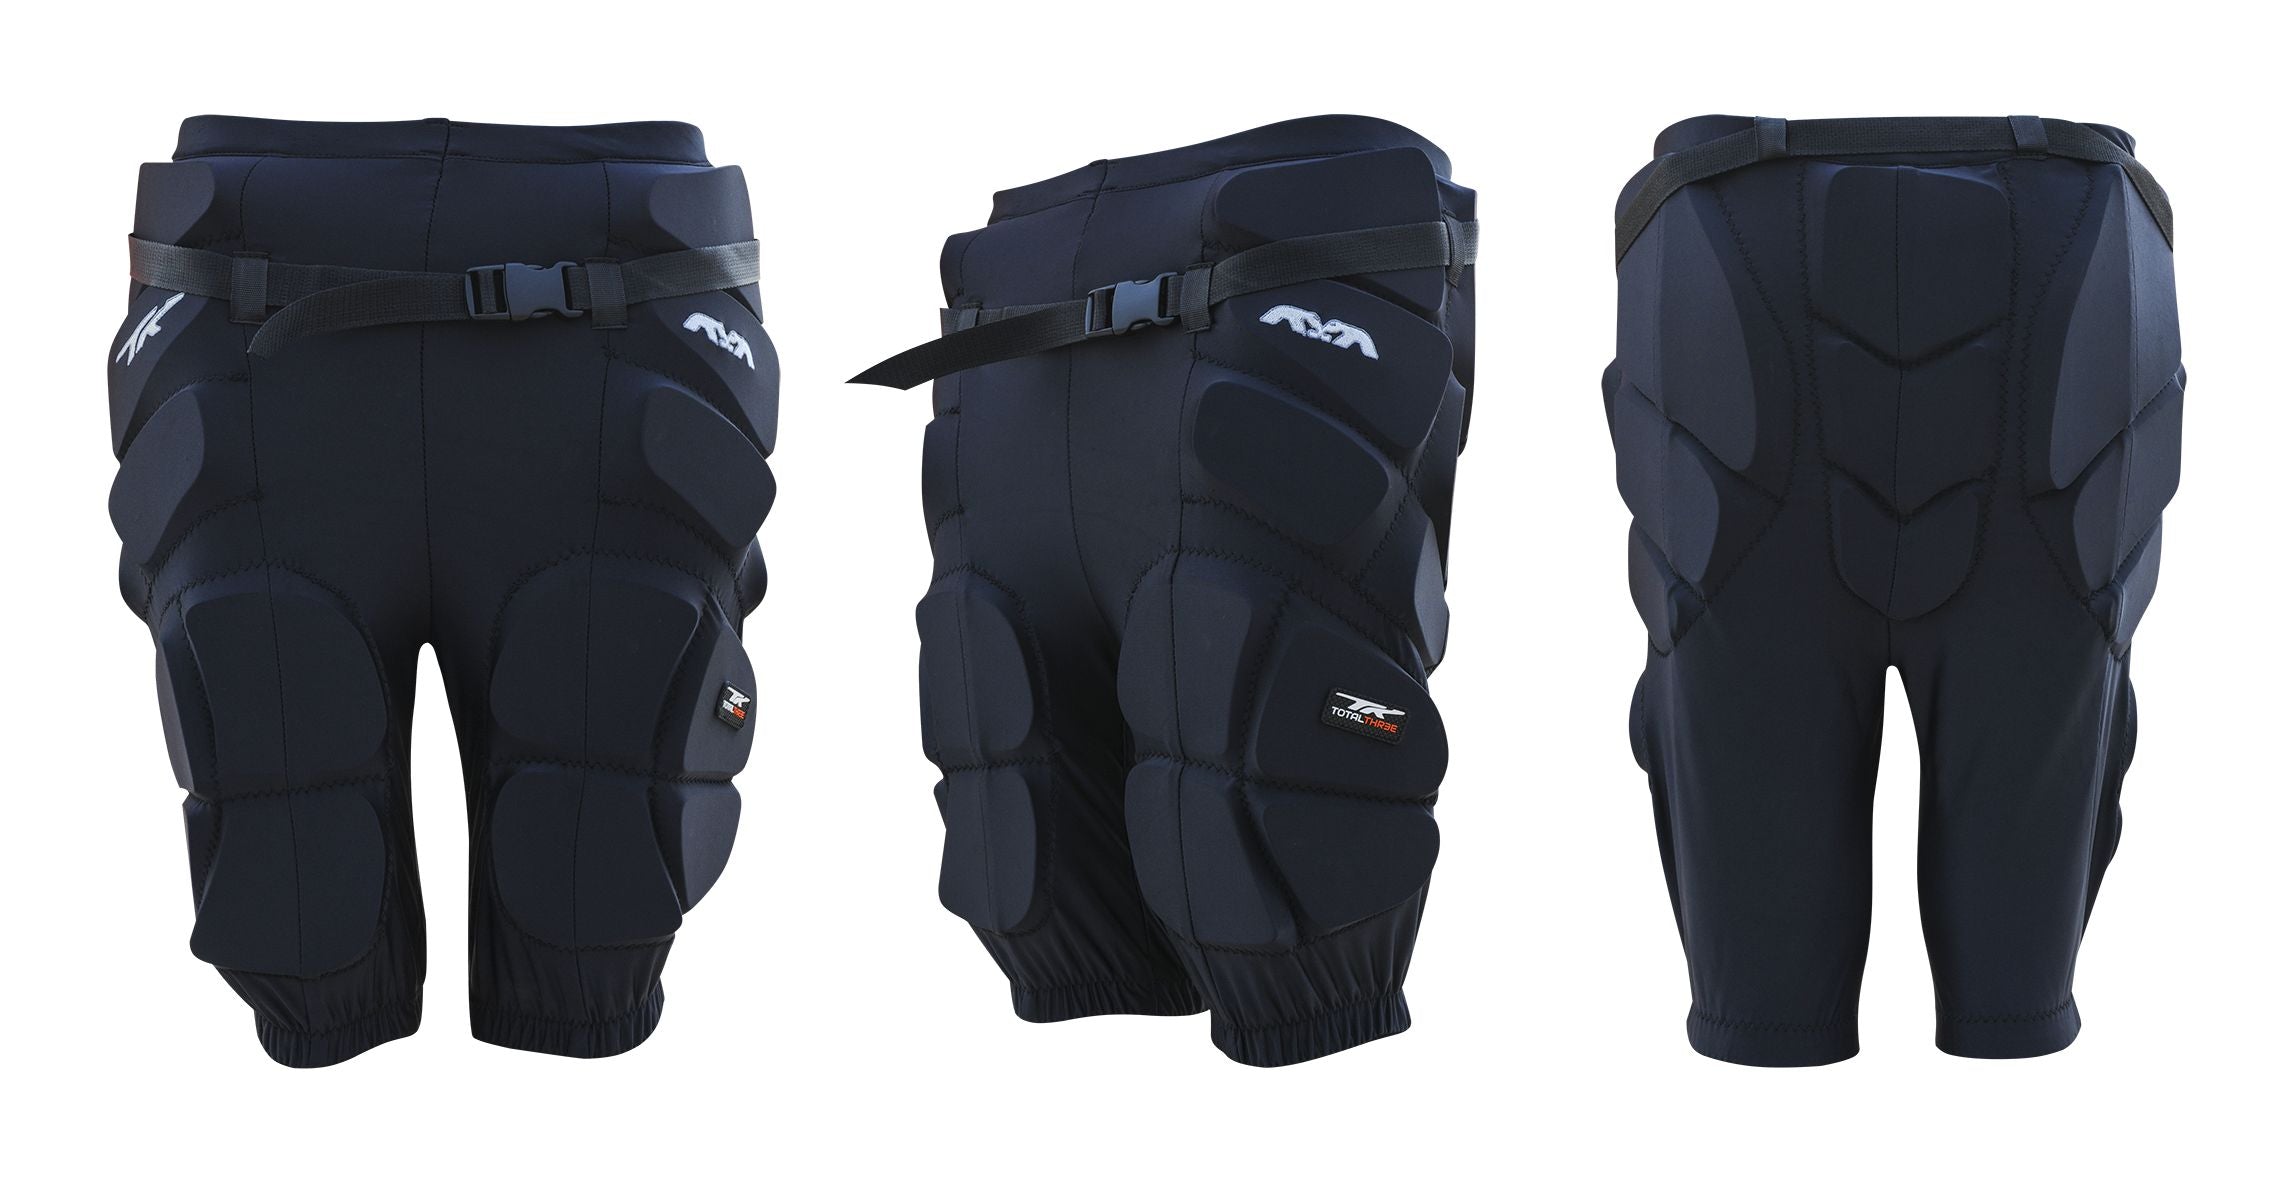 TK TOTAL THREE PPX 3.2 SAFETY PANTS